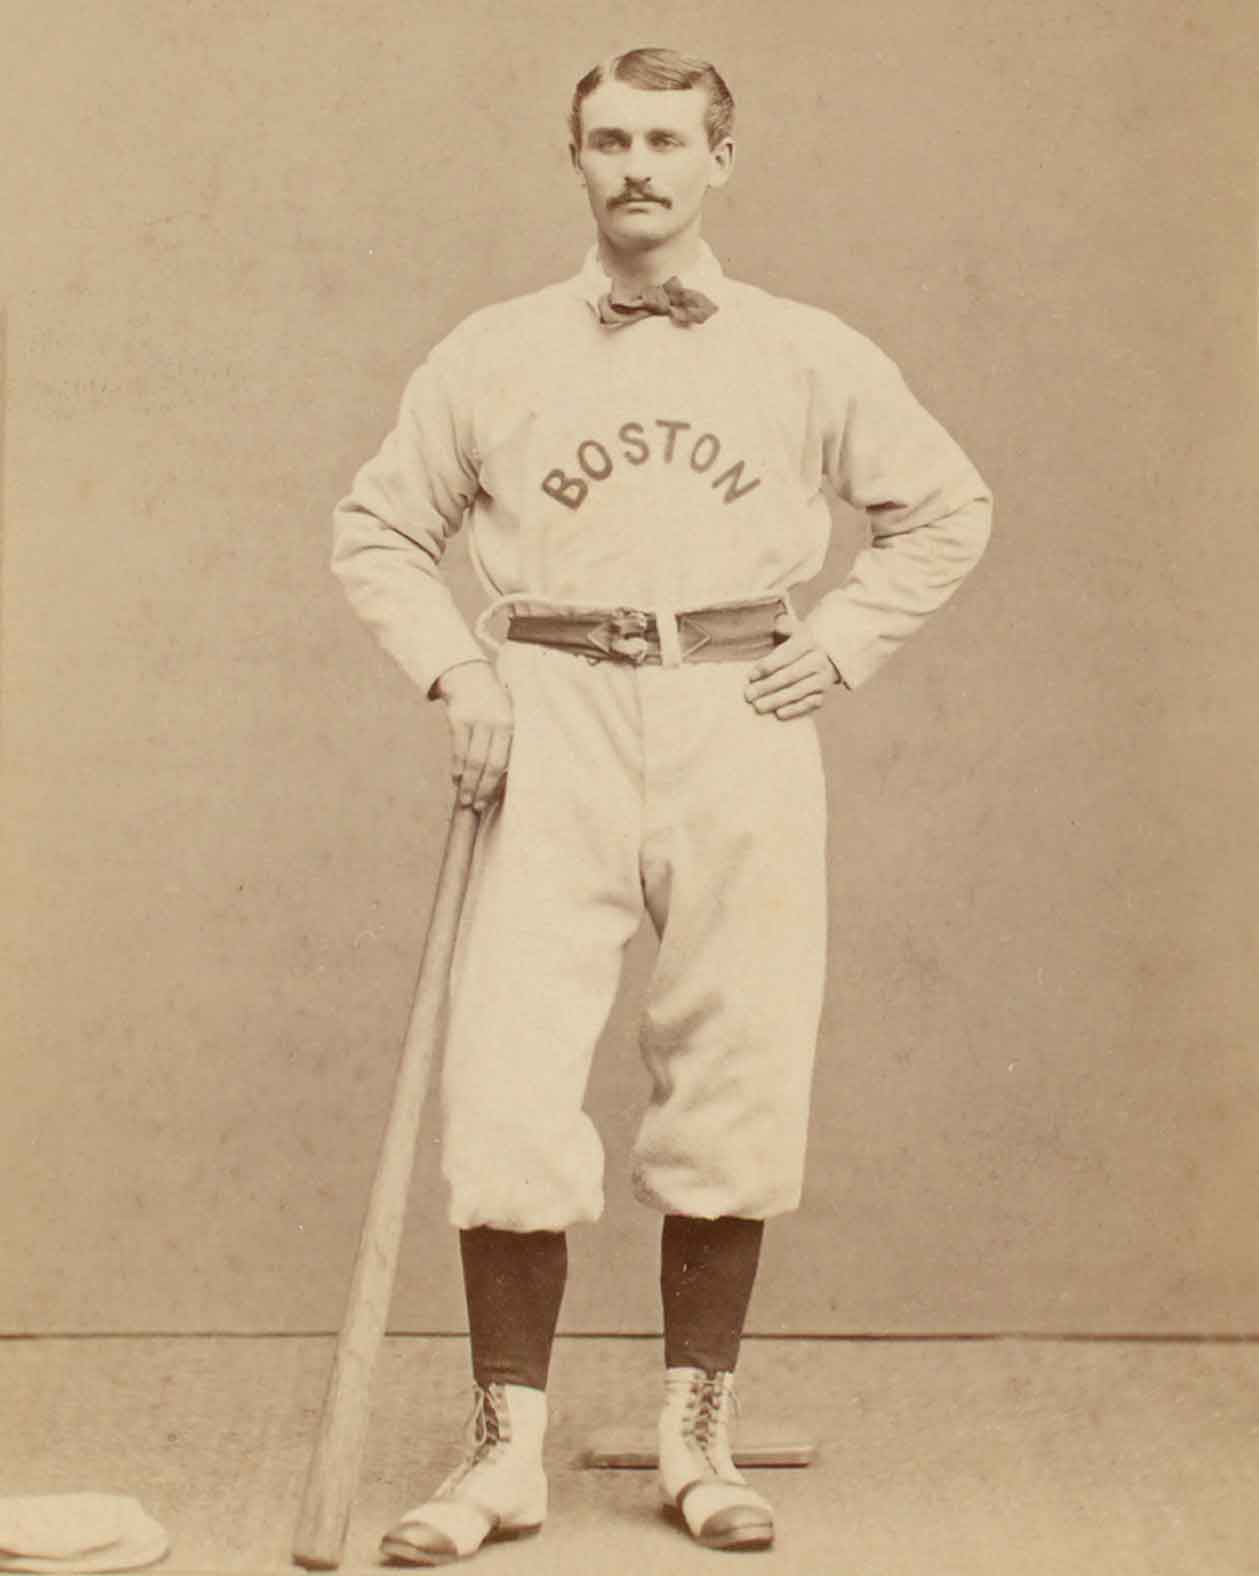 Black and white photo of a man posing with a bat and wearing a 19th century baseball uniform that says Boston.